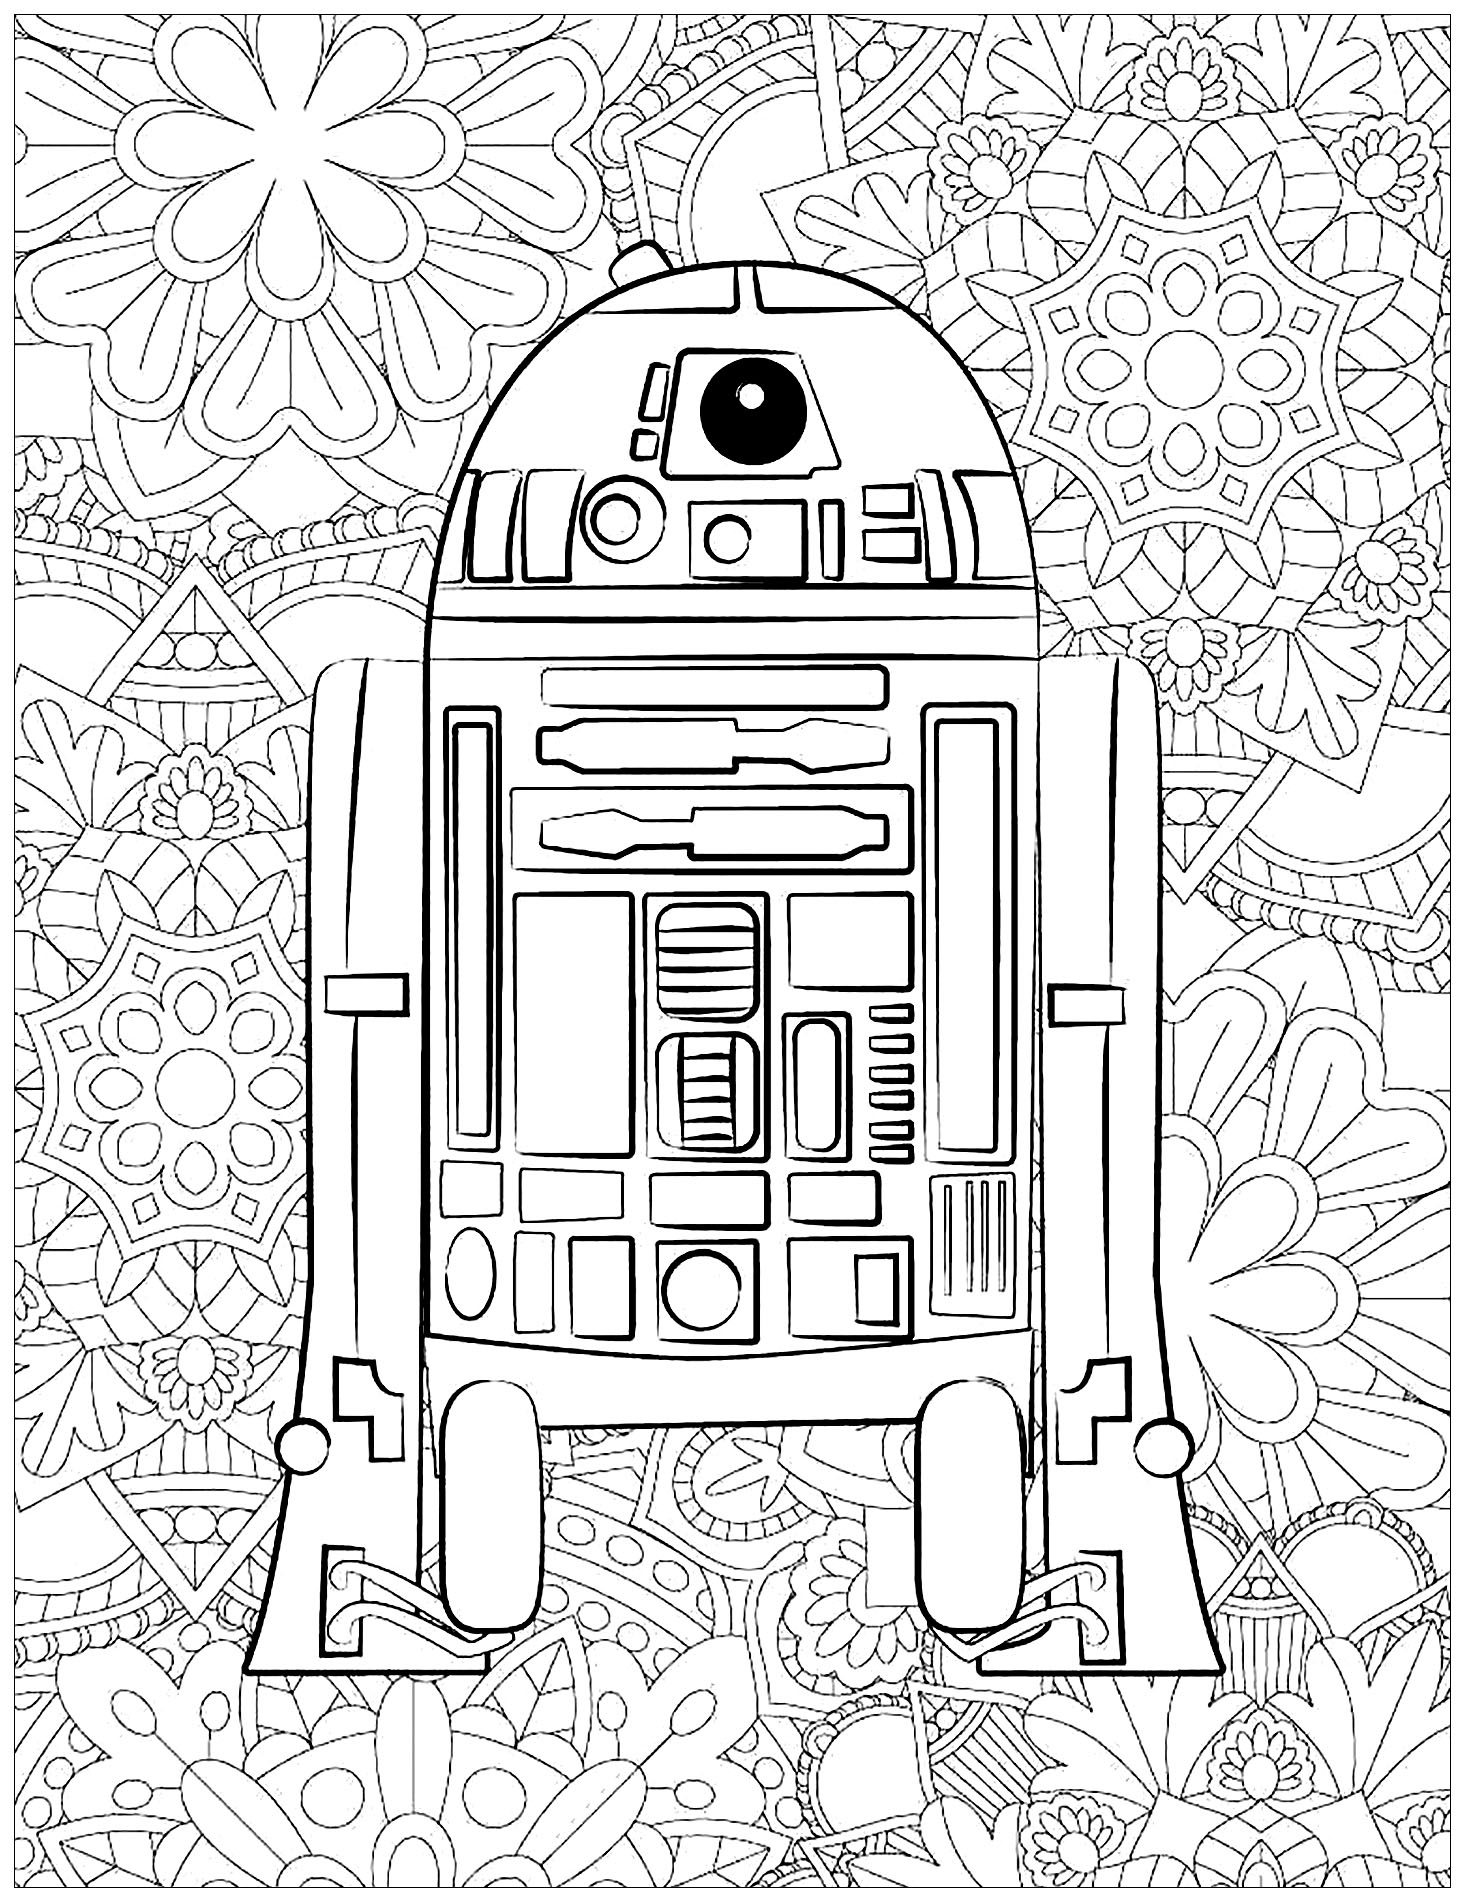 star-wars-free-to-color-for-kids-star-wars-kids-coloring-pages